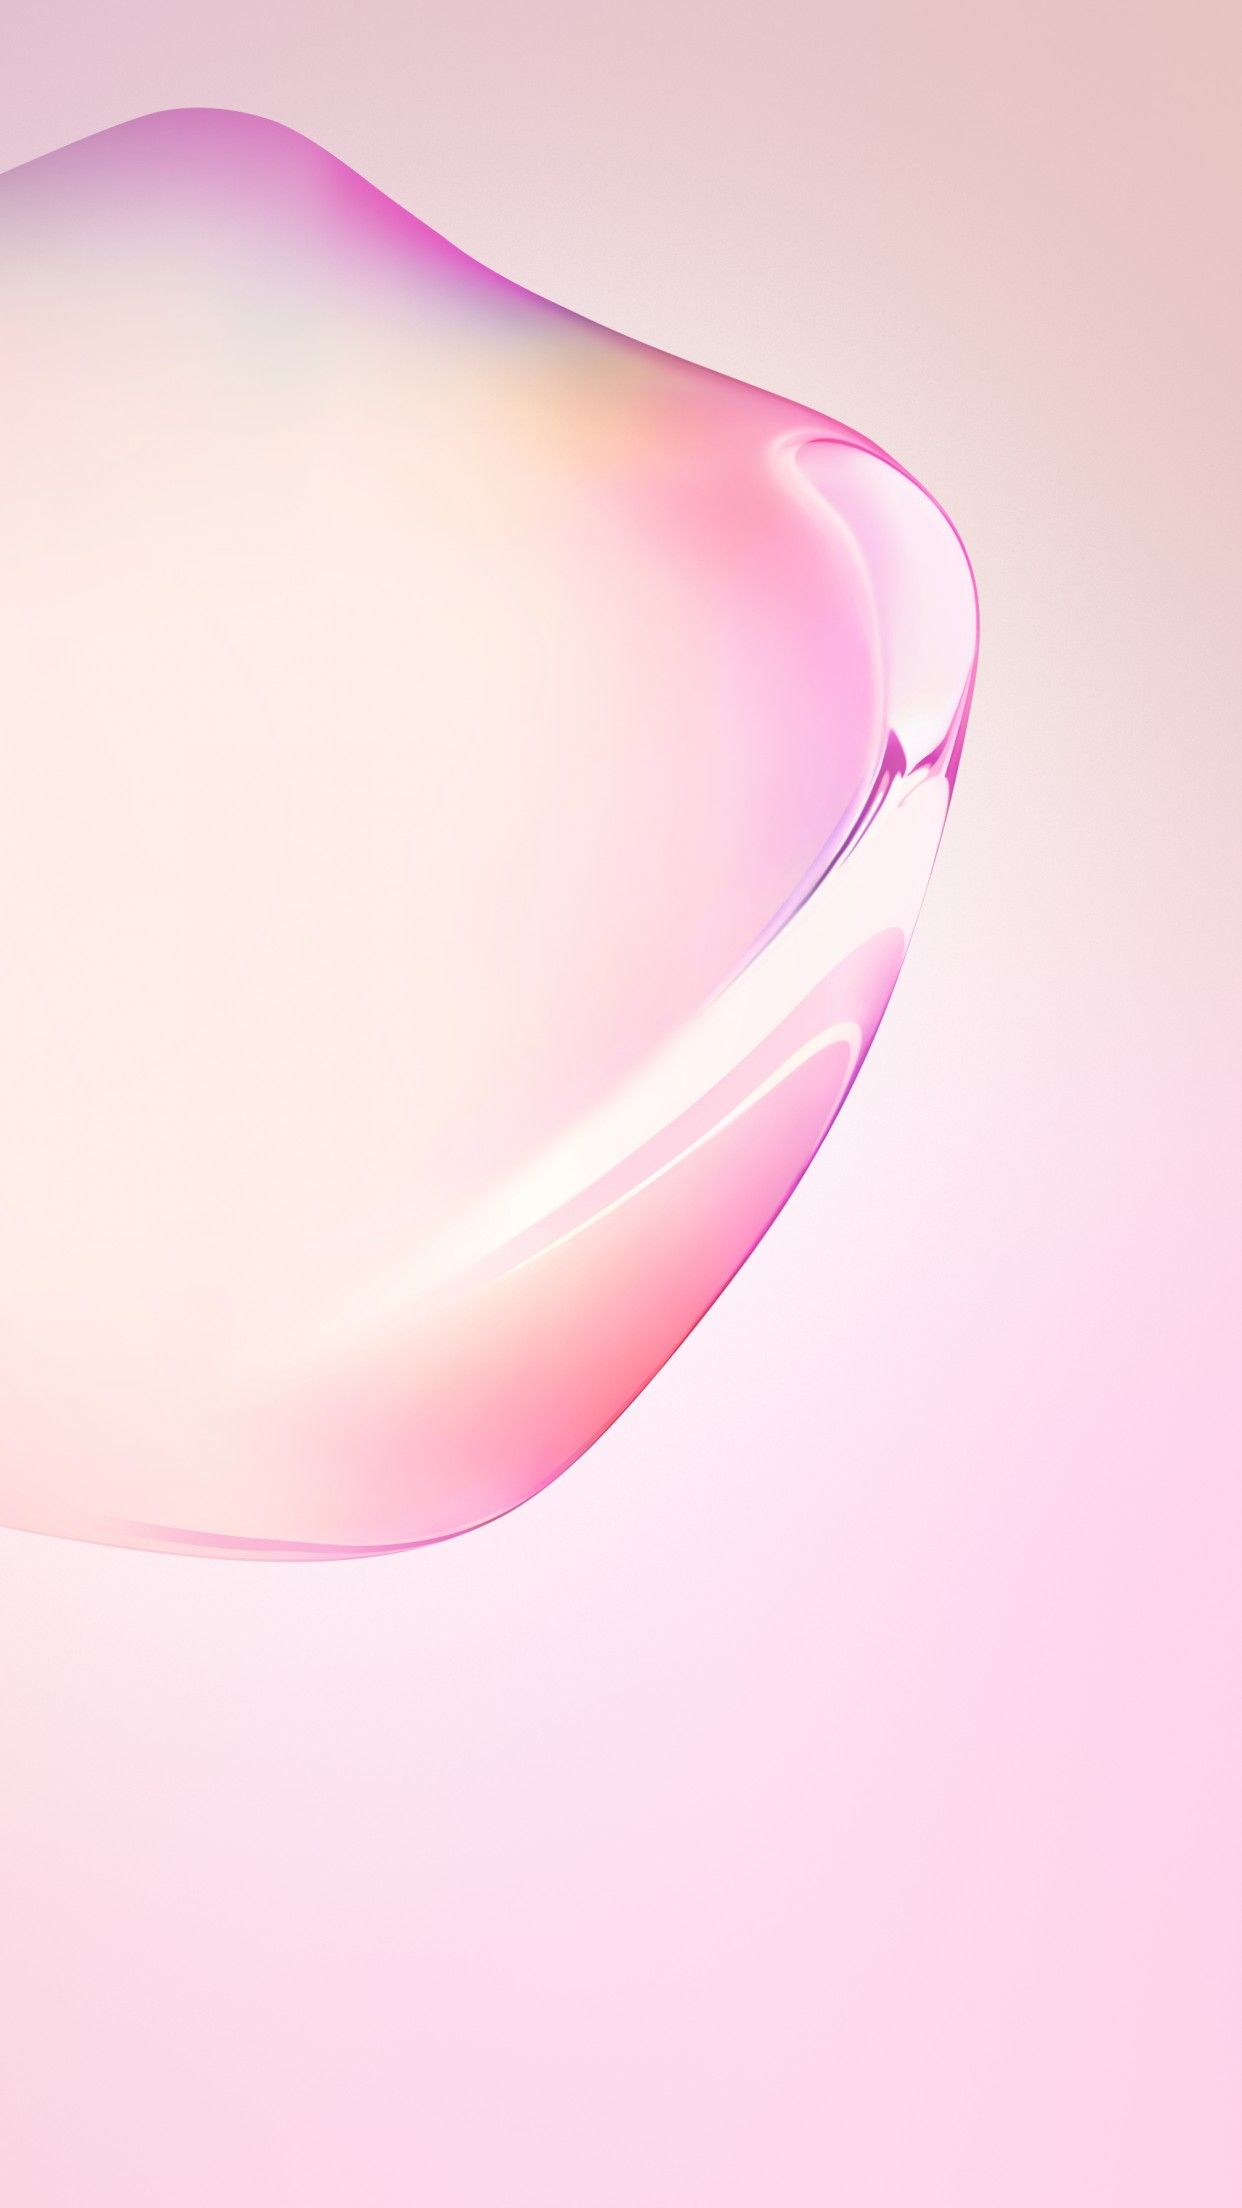 Samsung Galaxy Note10 Wallpaper 4K, Bubble, Pink, Stock, Android Pink background, Abstract